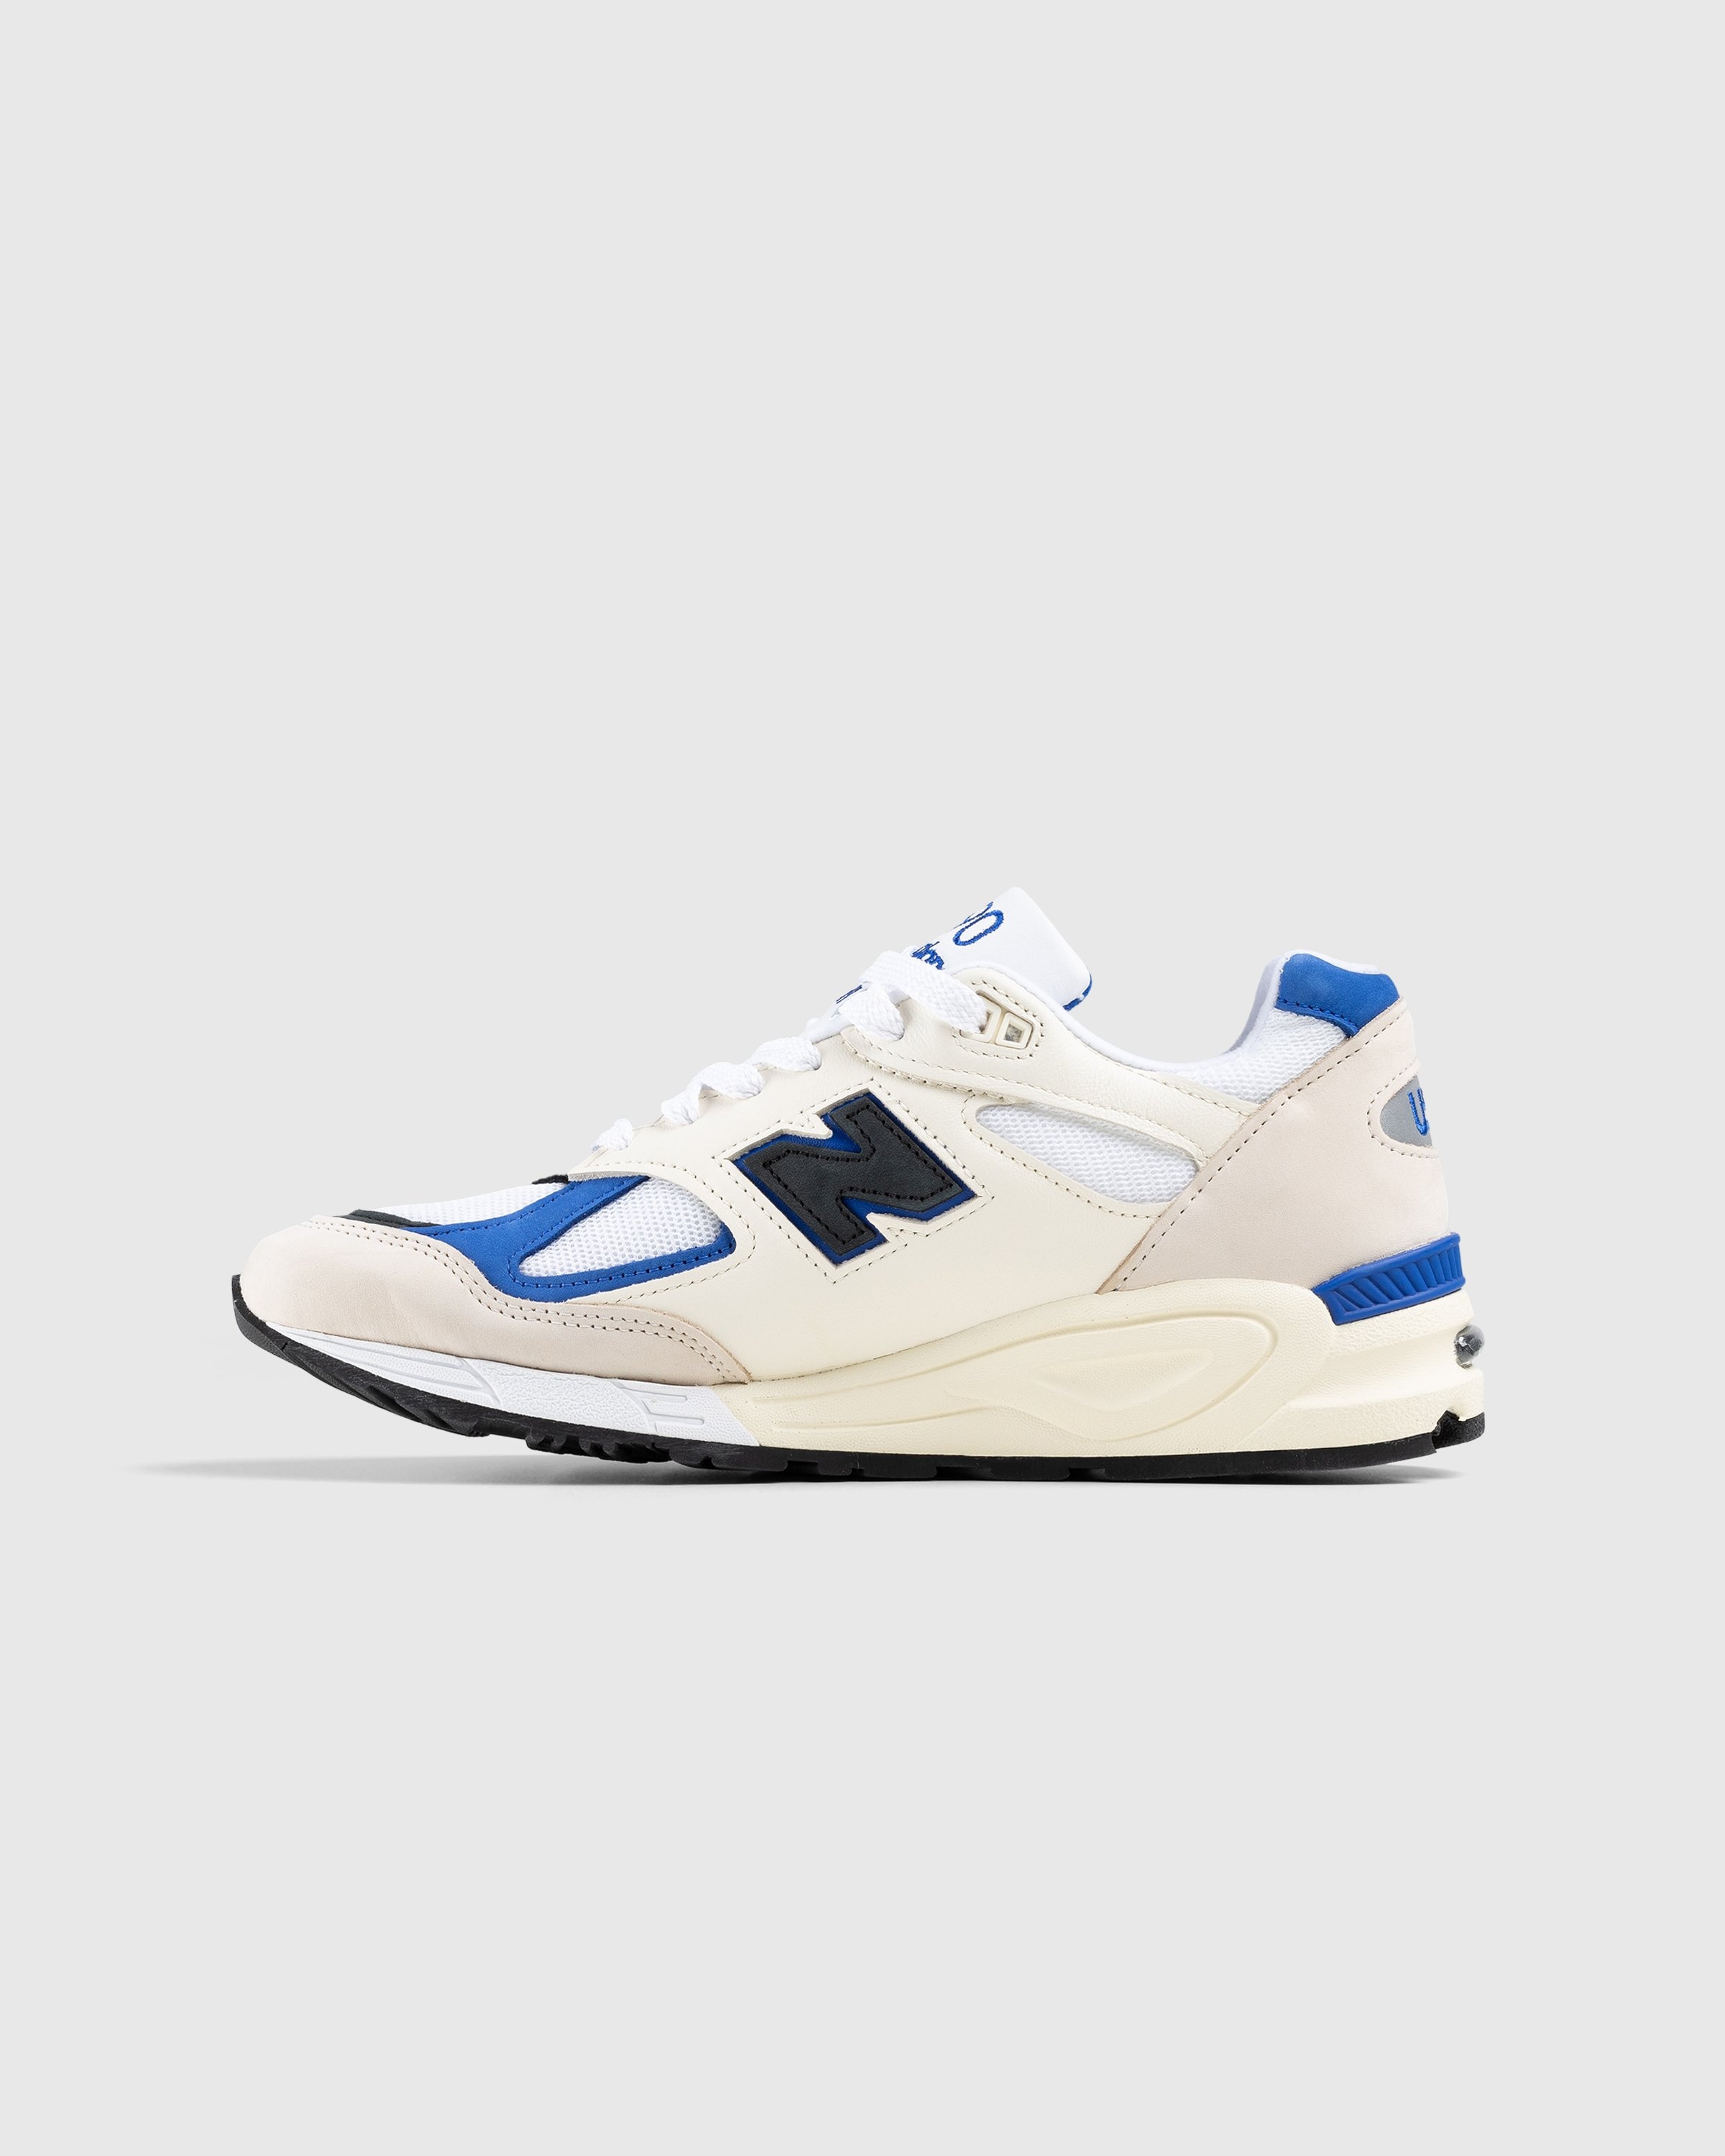 New Balance – M990WB2 White - Low Top Sneakers - White - Image 2